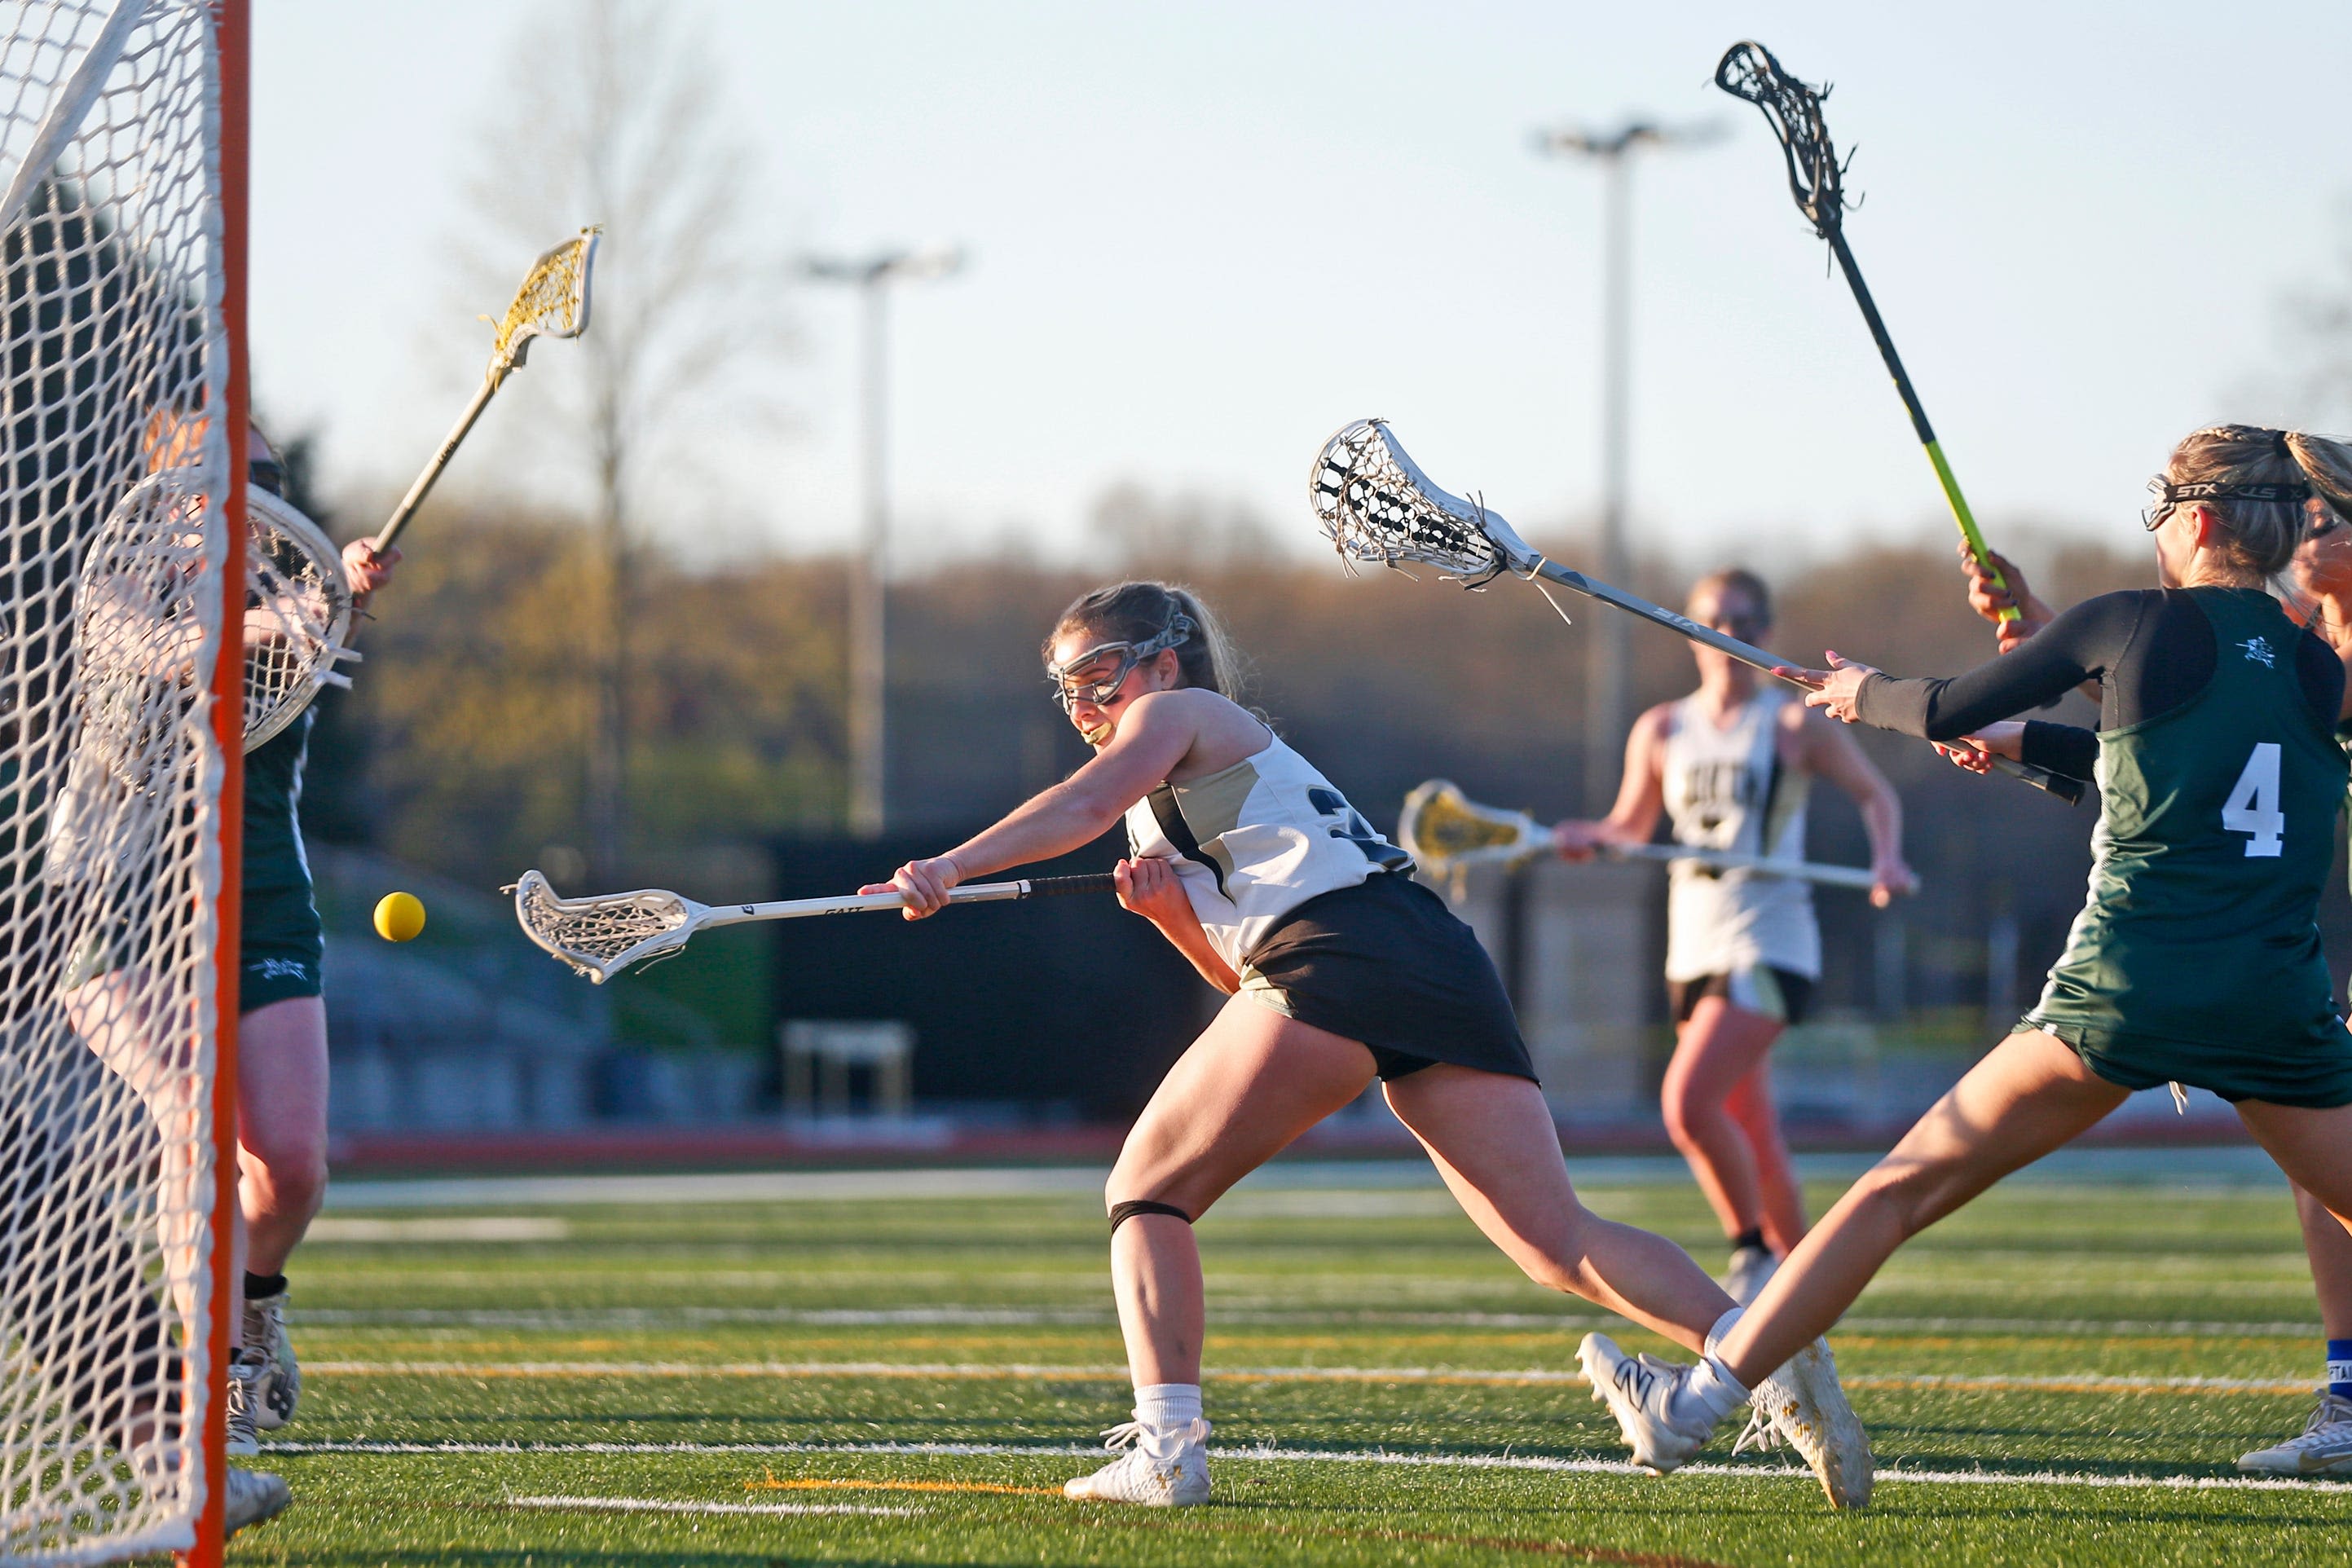 Catch up with what's going on in the girls lax playoff picture in this week's power rankings